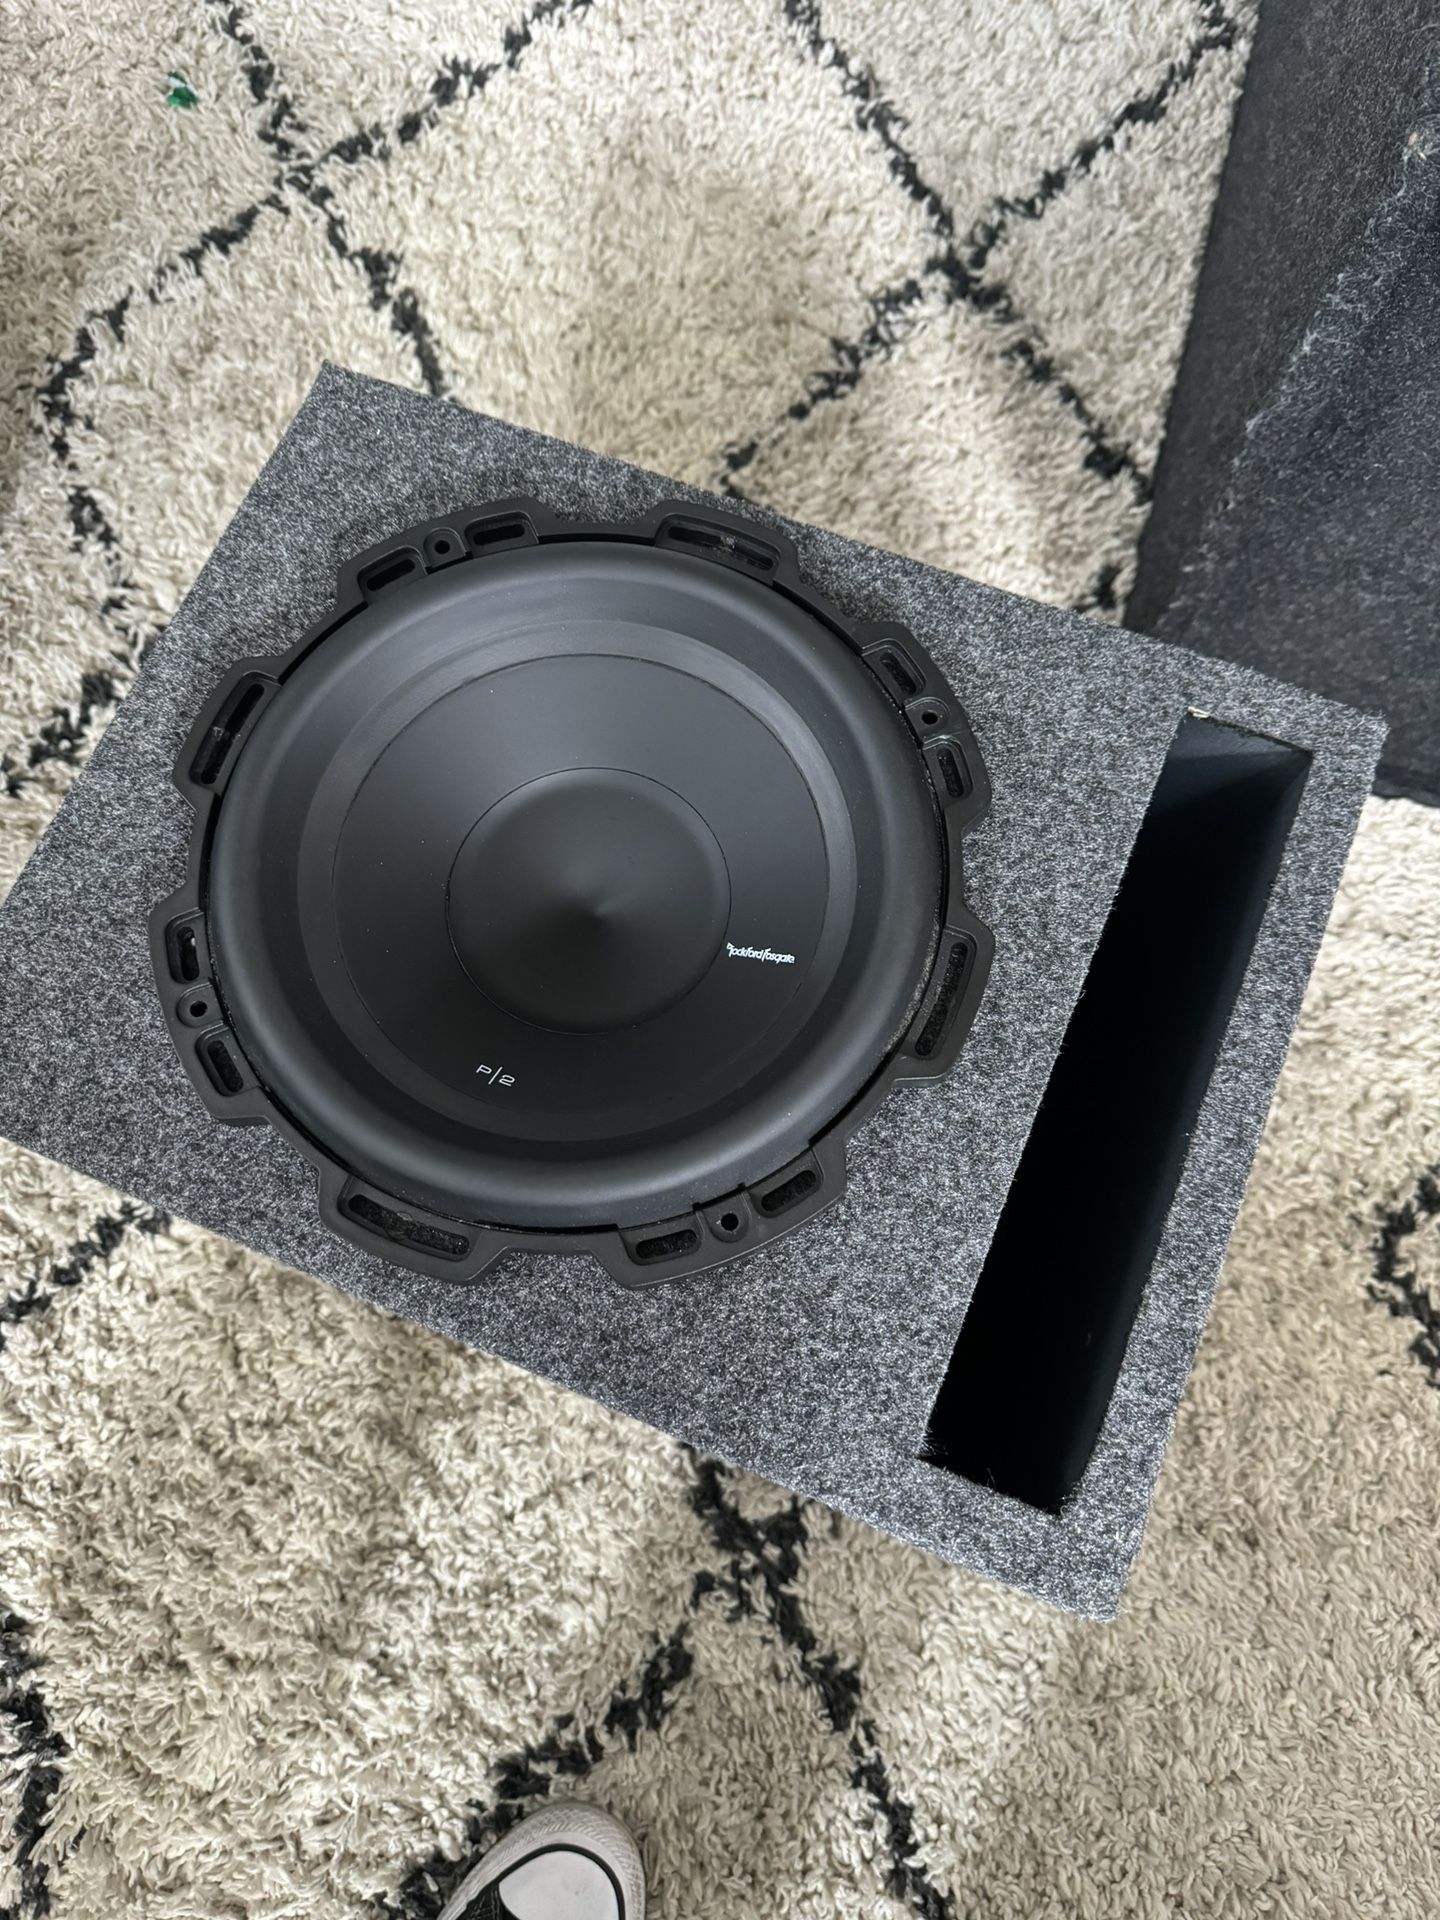 10 Inch P2 In Ported Box New